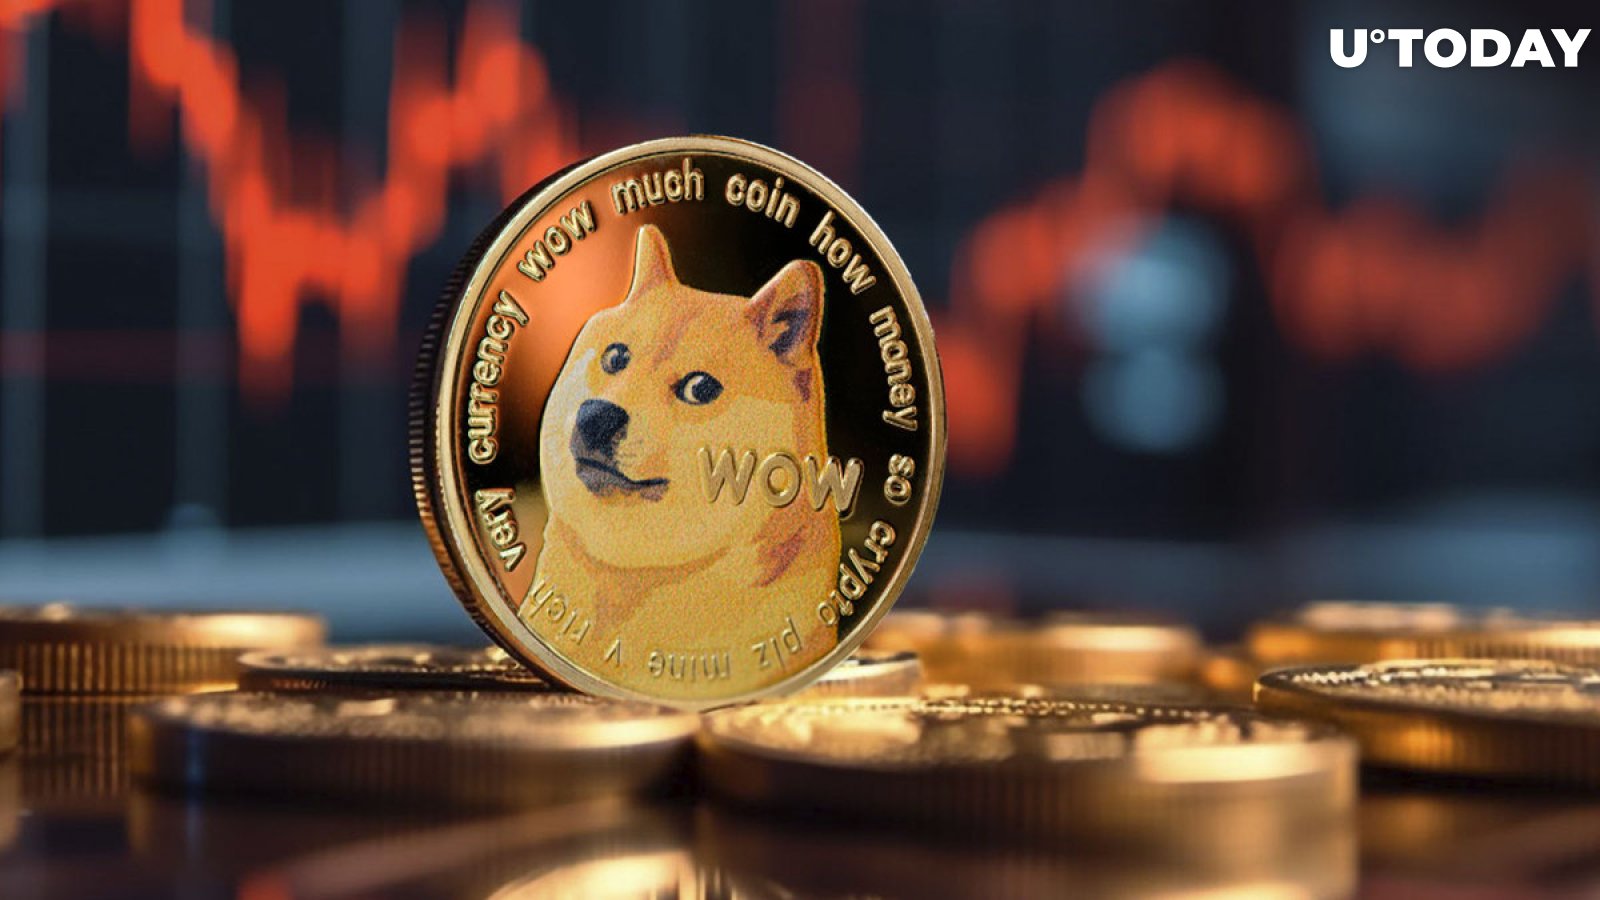 591 Million Dogecoin (DOGE) Liquidated in 24 hours, What's Happening?